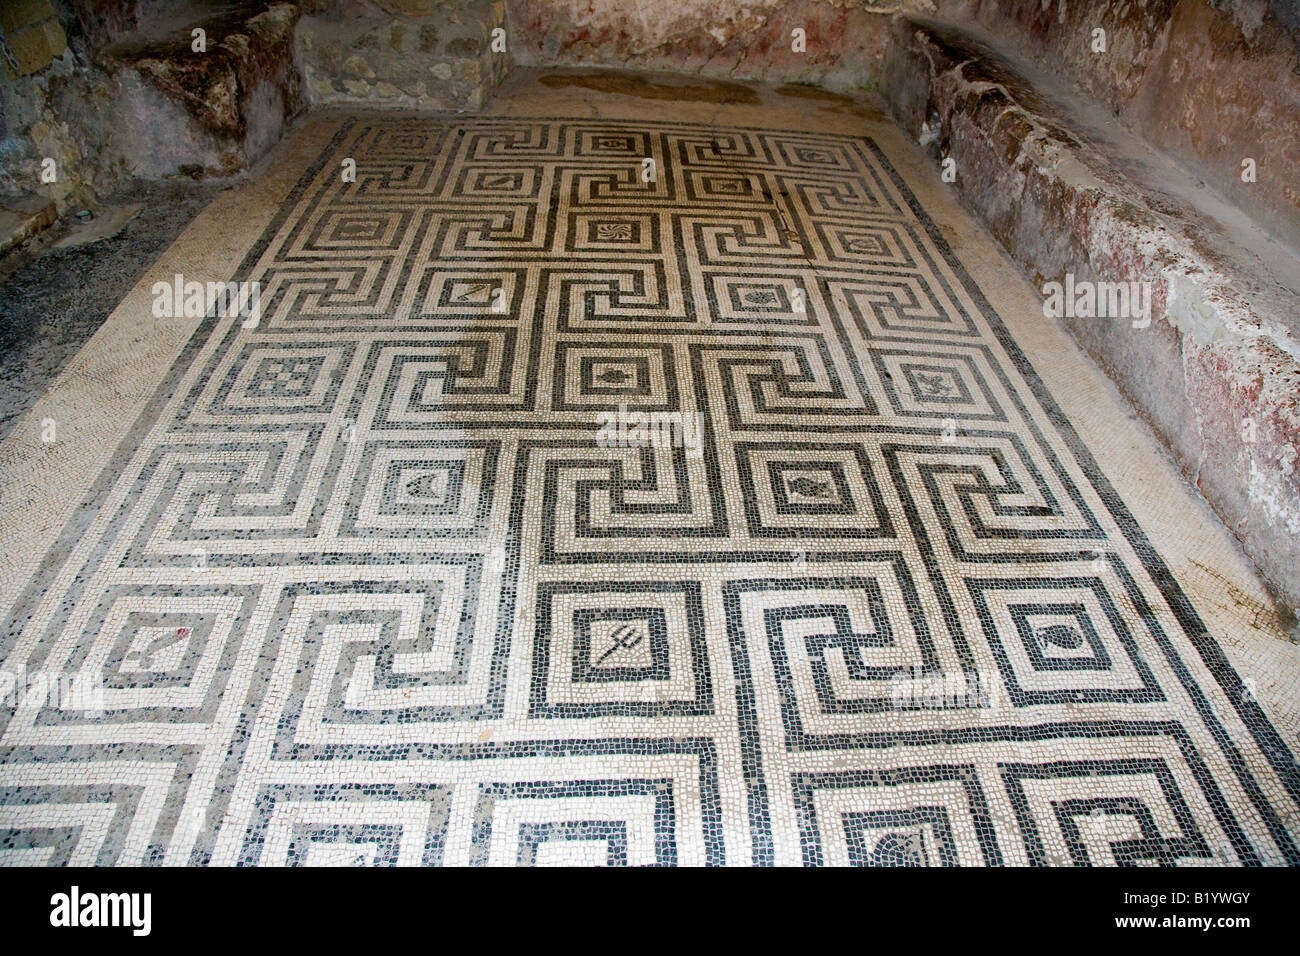 Designs in mosaic on the floor of the baths complex Herculaneum Italy Stock Photo